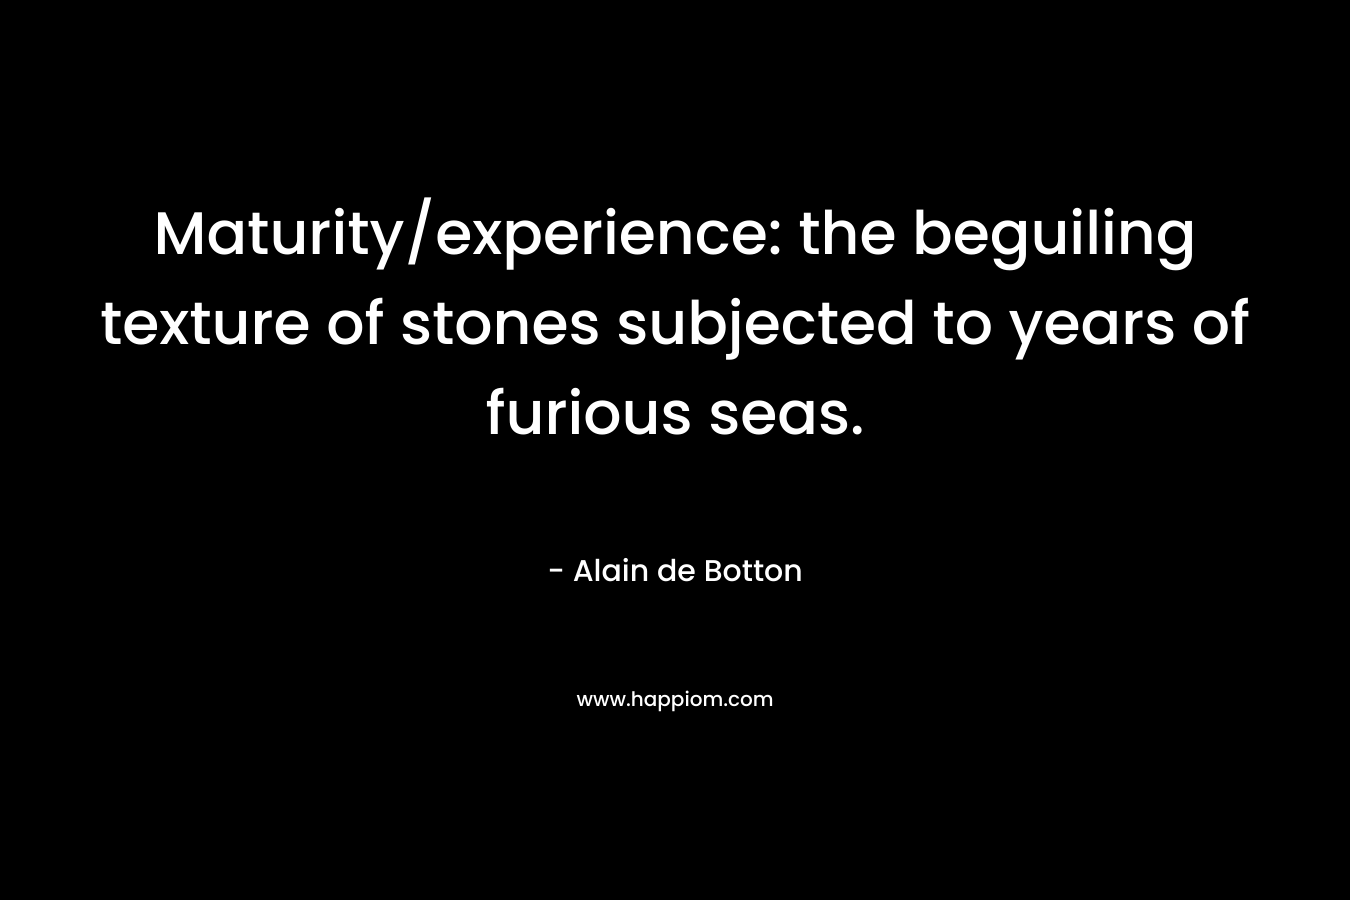 Maturity/experience: the beguiling texture of stones subjected to years of furious seas. – Alain de Botton